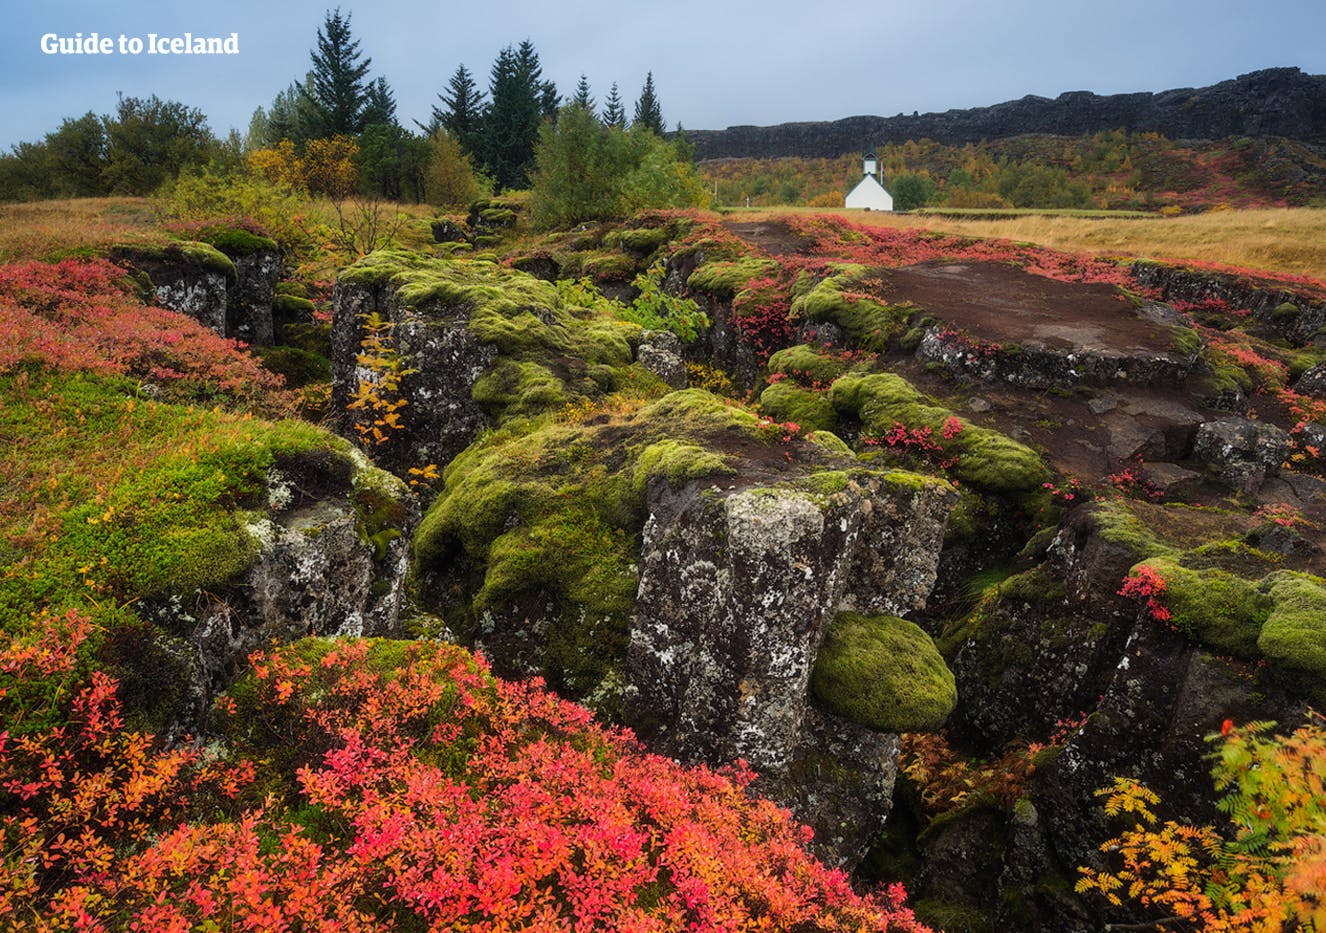 Moss-covered lava fields at Þingvellin National Park which is one part of the famous Golden Circle route.